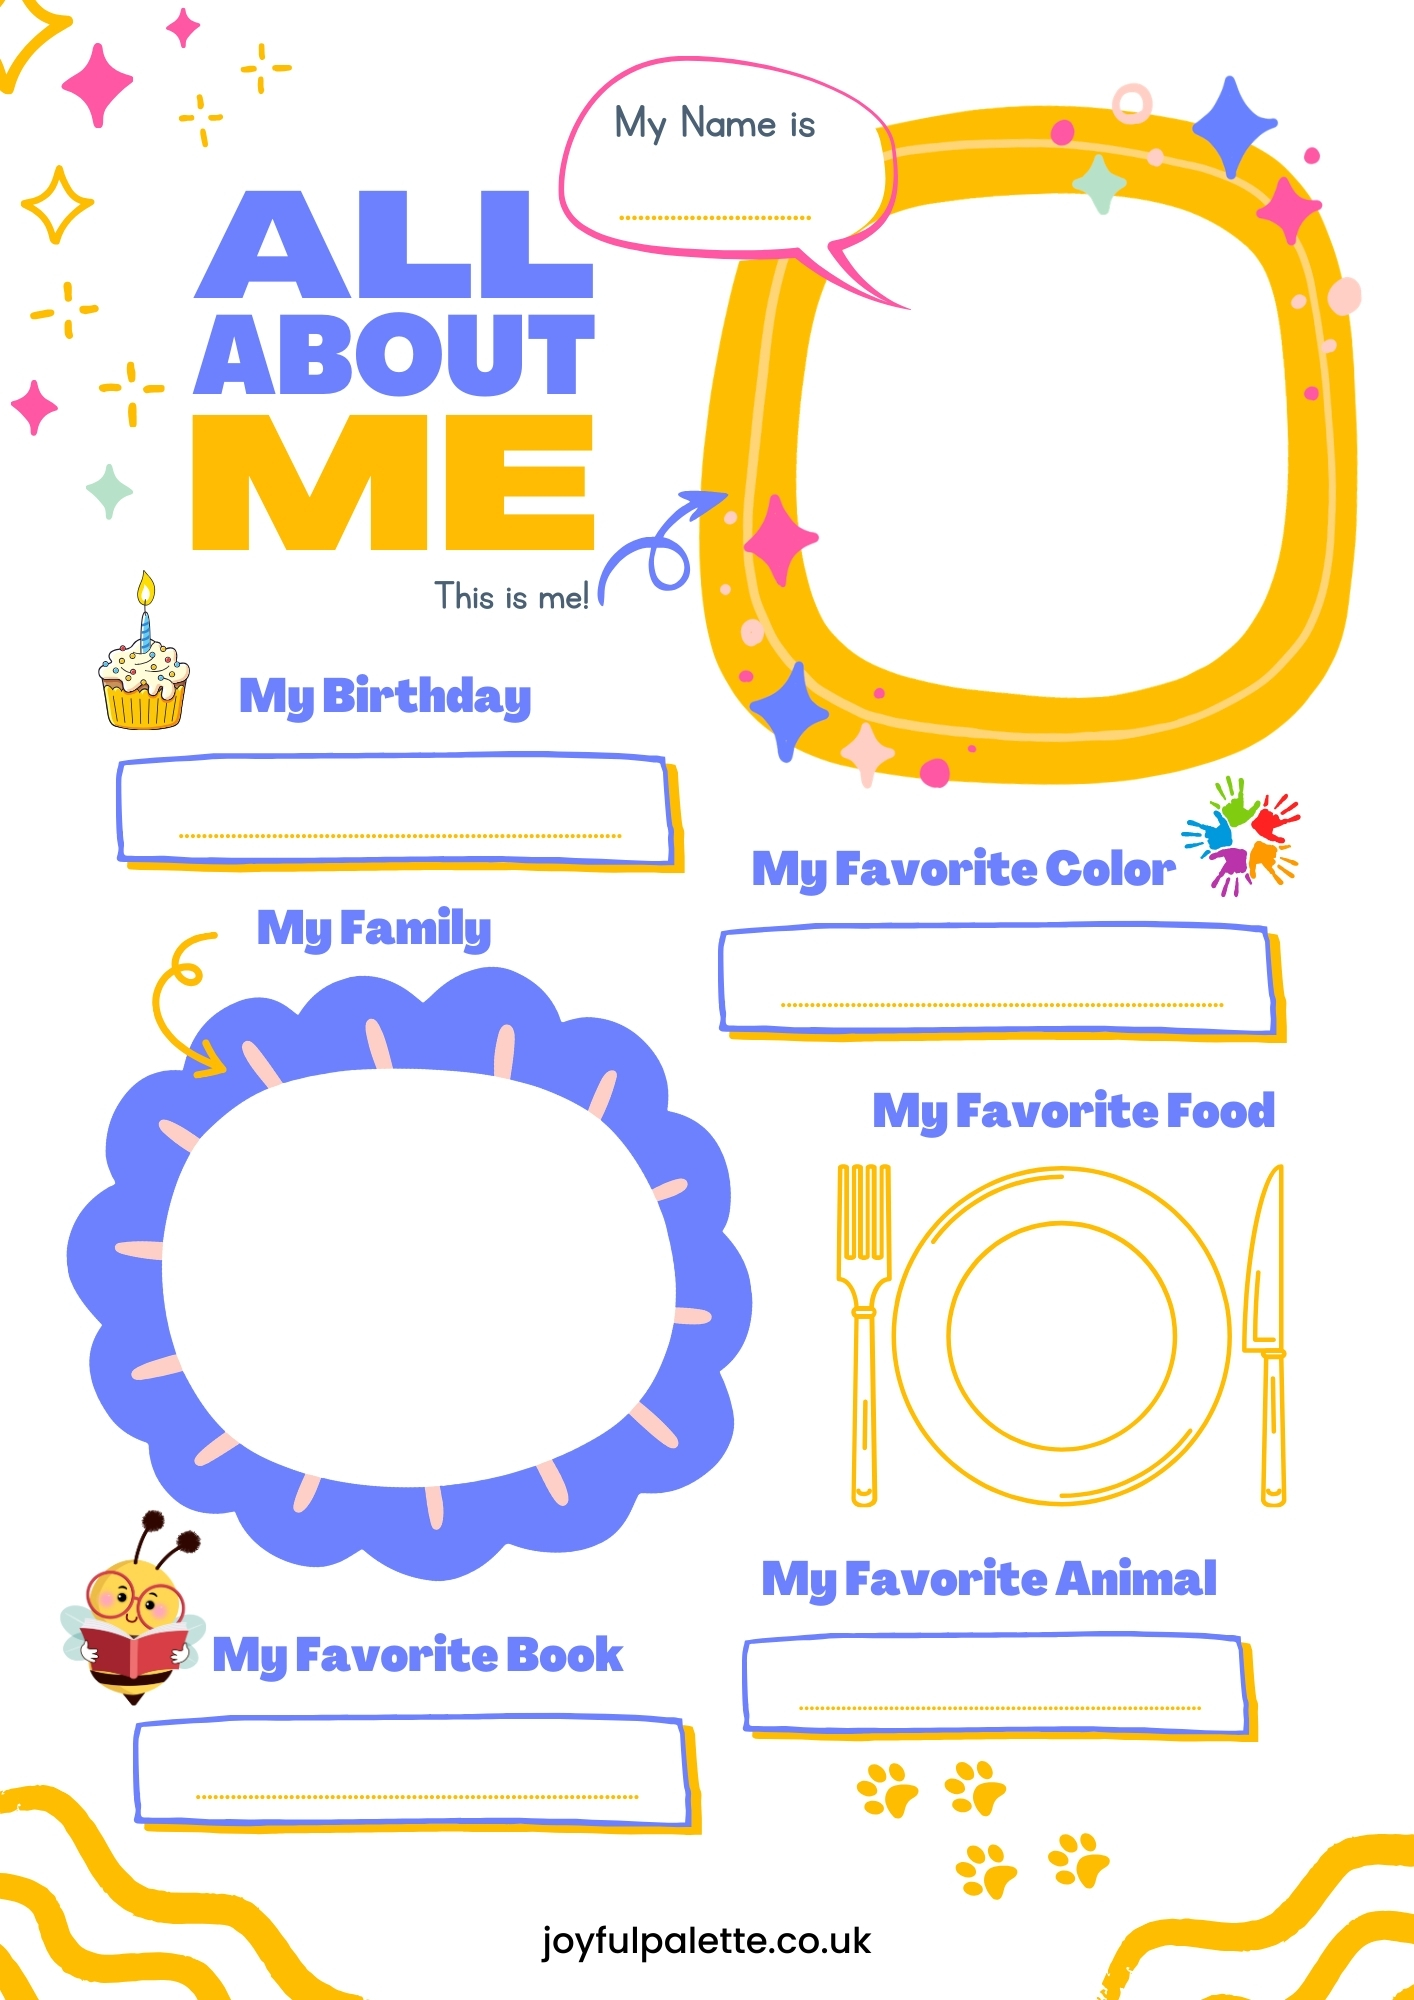 all about me worksheet pdf